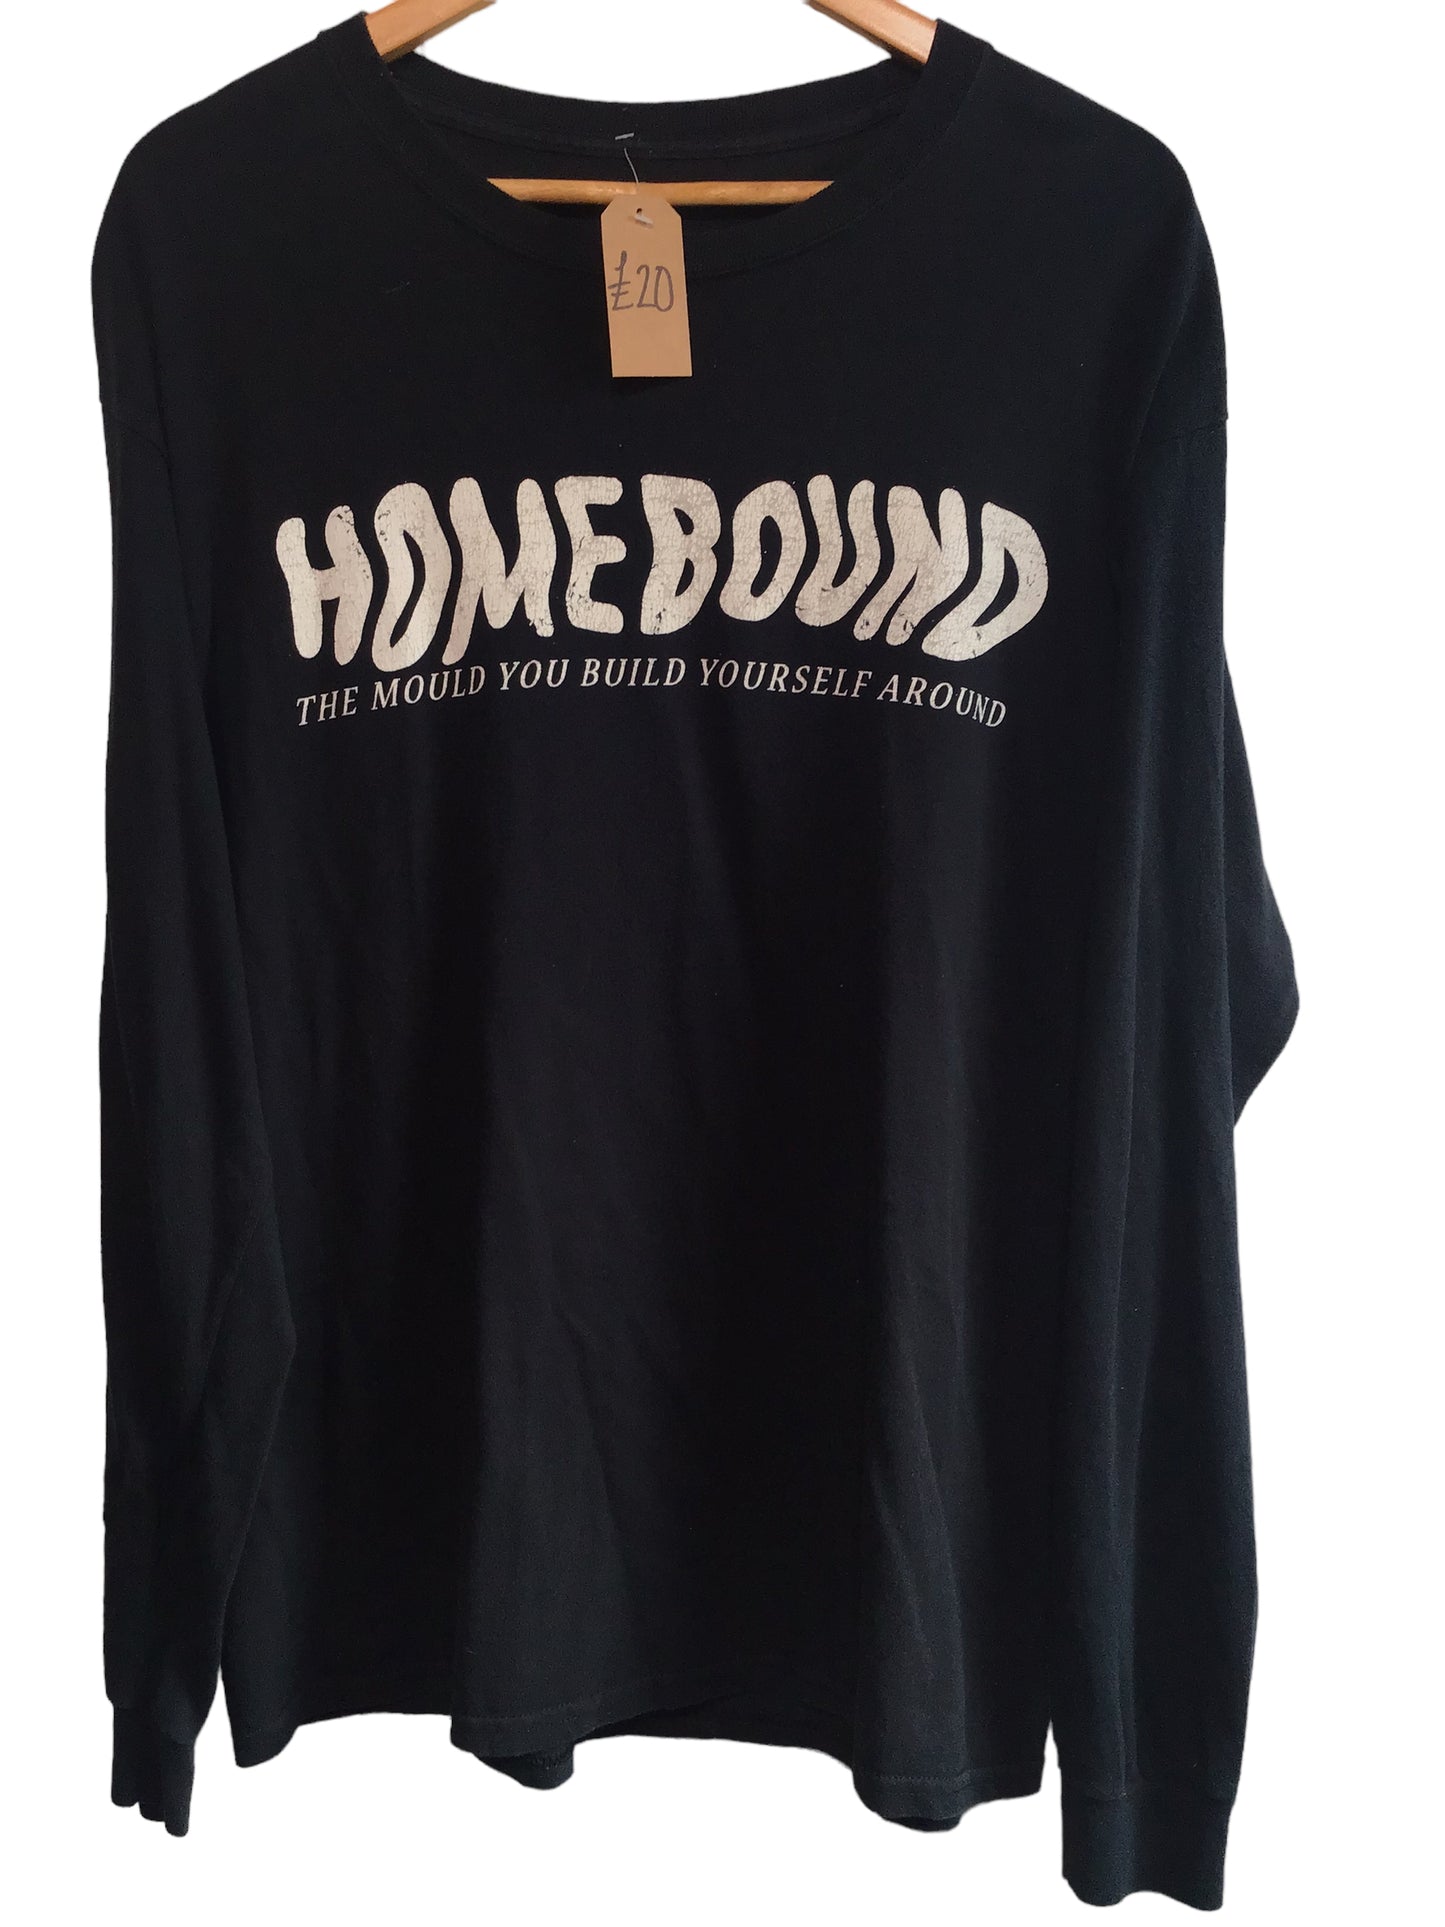 Home Bound Long Sleeved Top (Size XXL)